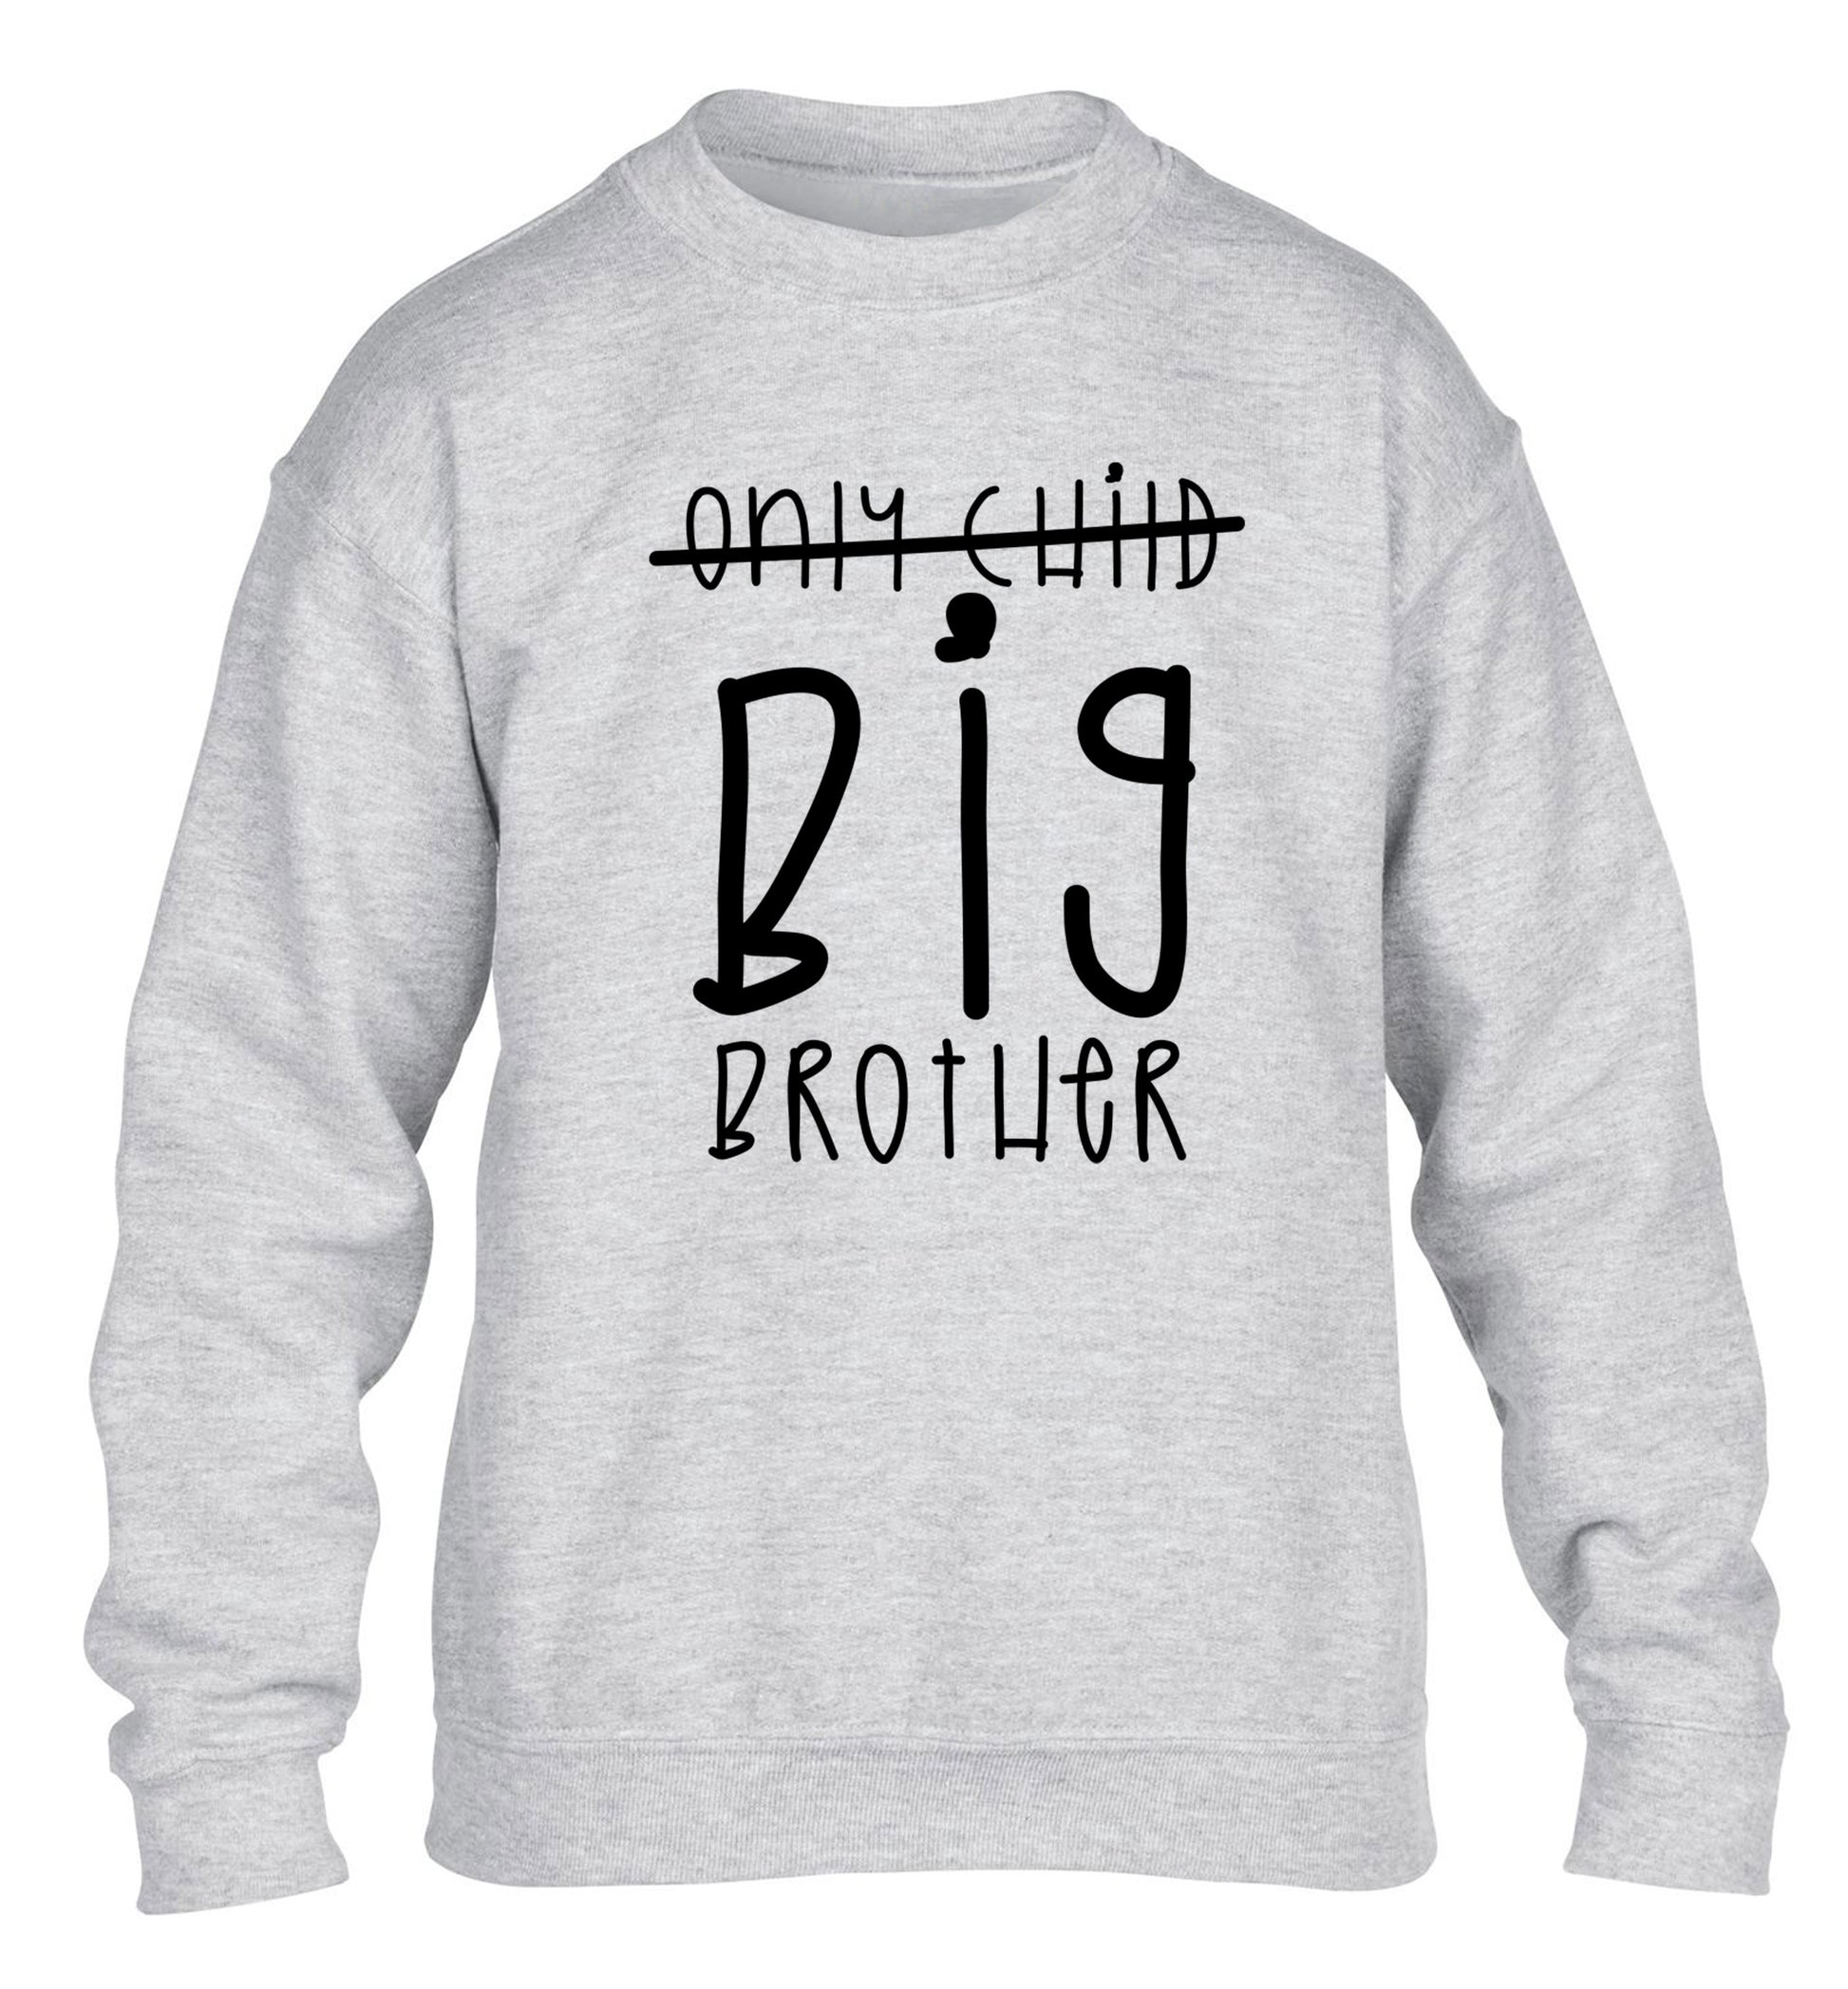 Only child big brother children's grey sweater 12-14 Years